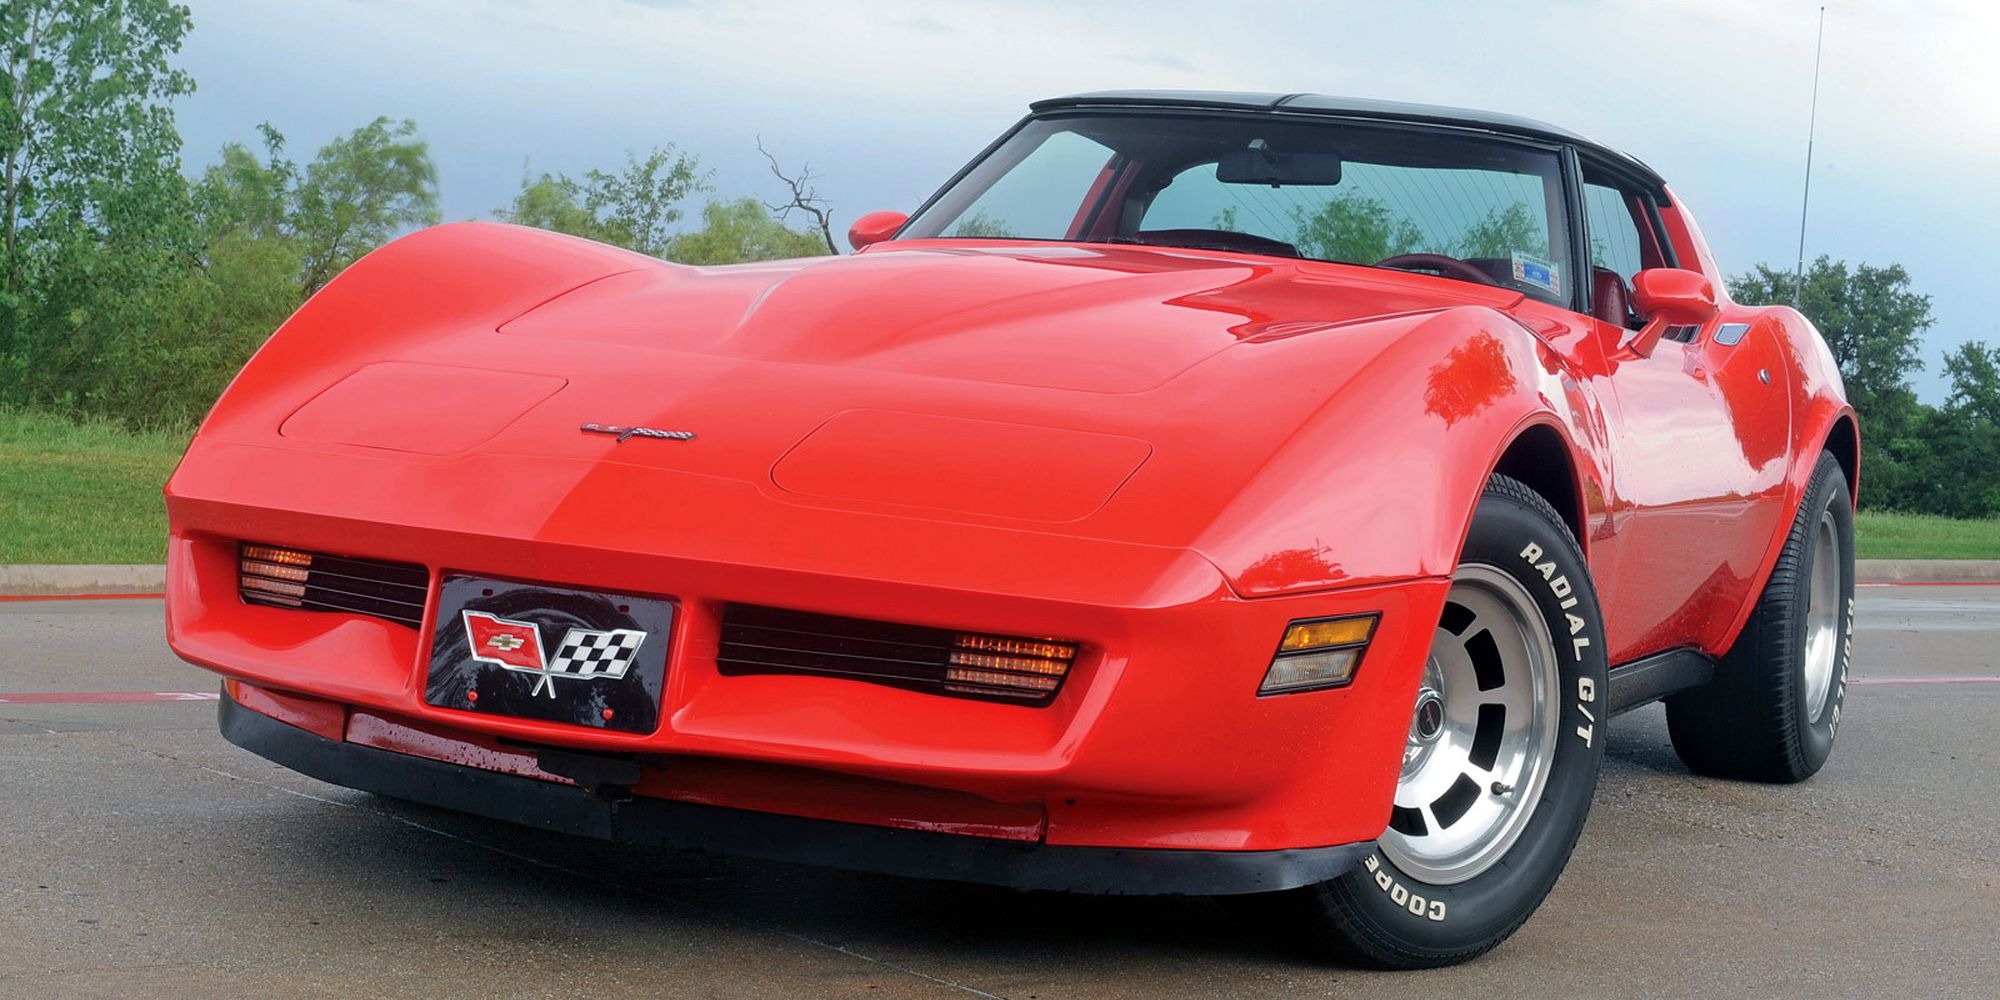 The front of a late model C3 Corvette